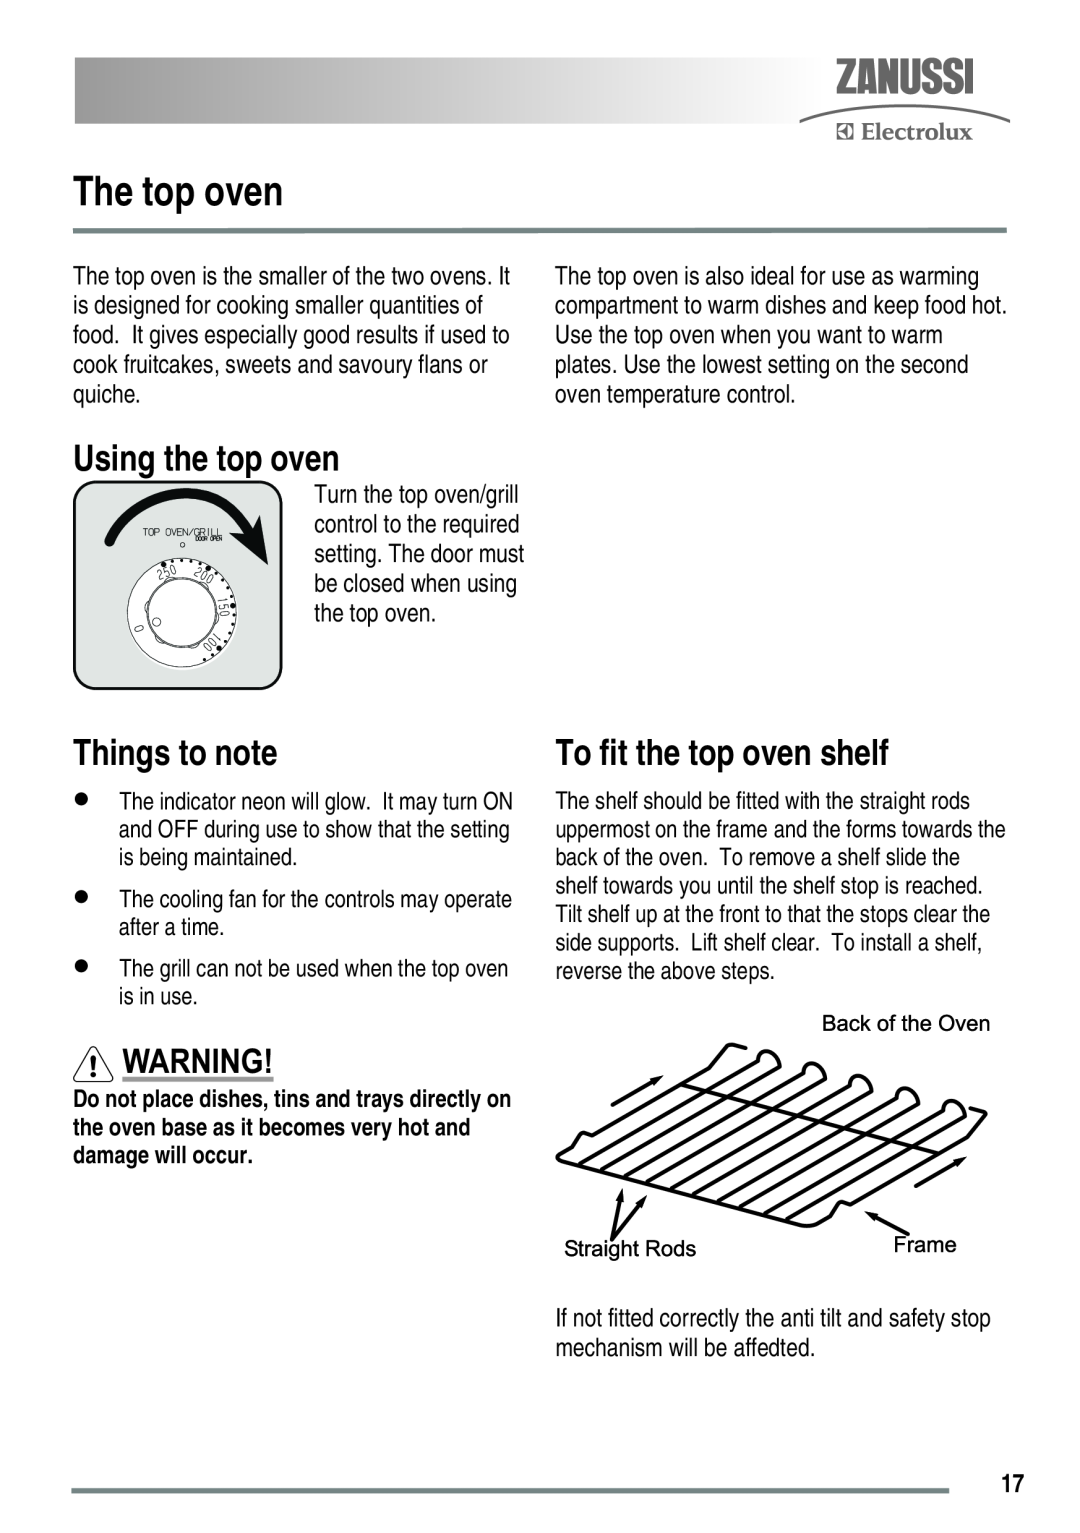 Zanussi ZKC5030 user manual The top oven, Using the top oven, To fit the top oven shelf, Things to note 